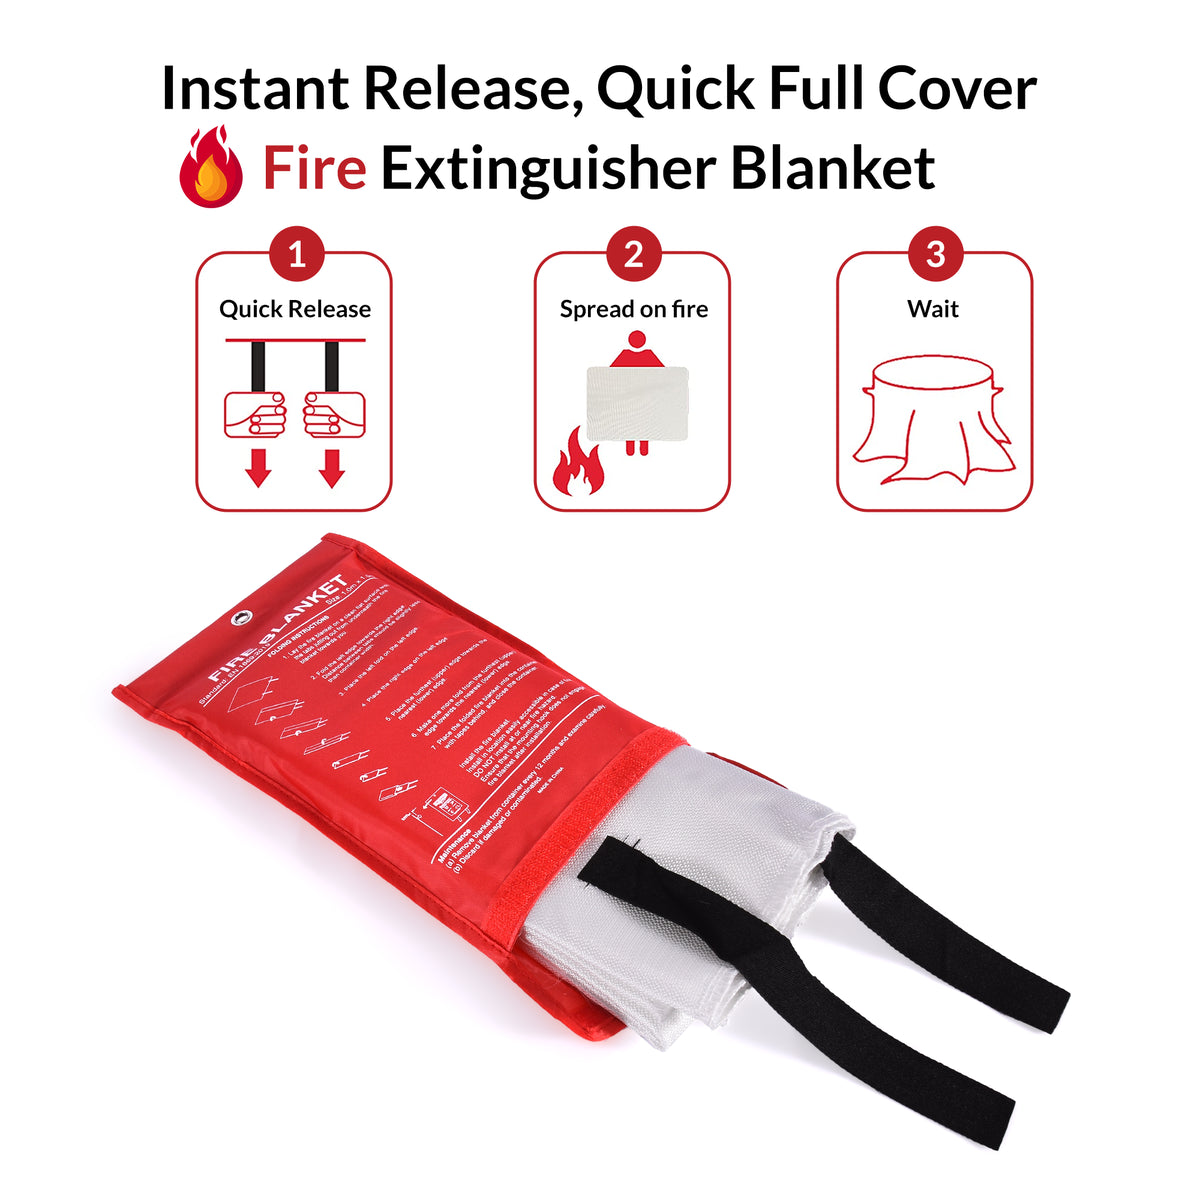 Fire-Resistant Thermal Blanket For Use In Emergency Situations